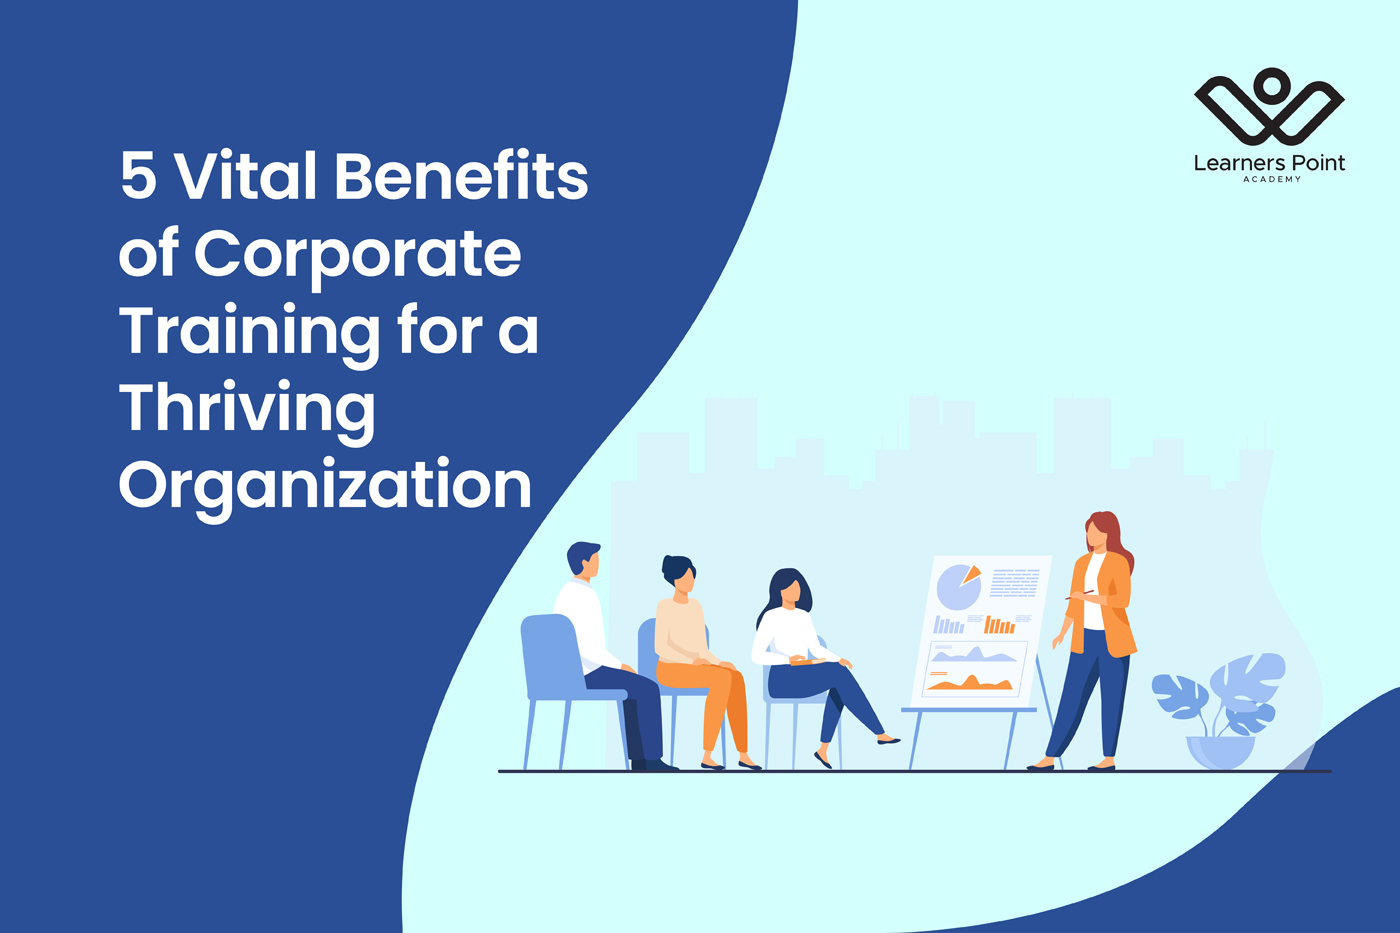 5 Vital Benefits of Corporate Training for a Thriving Organization